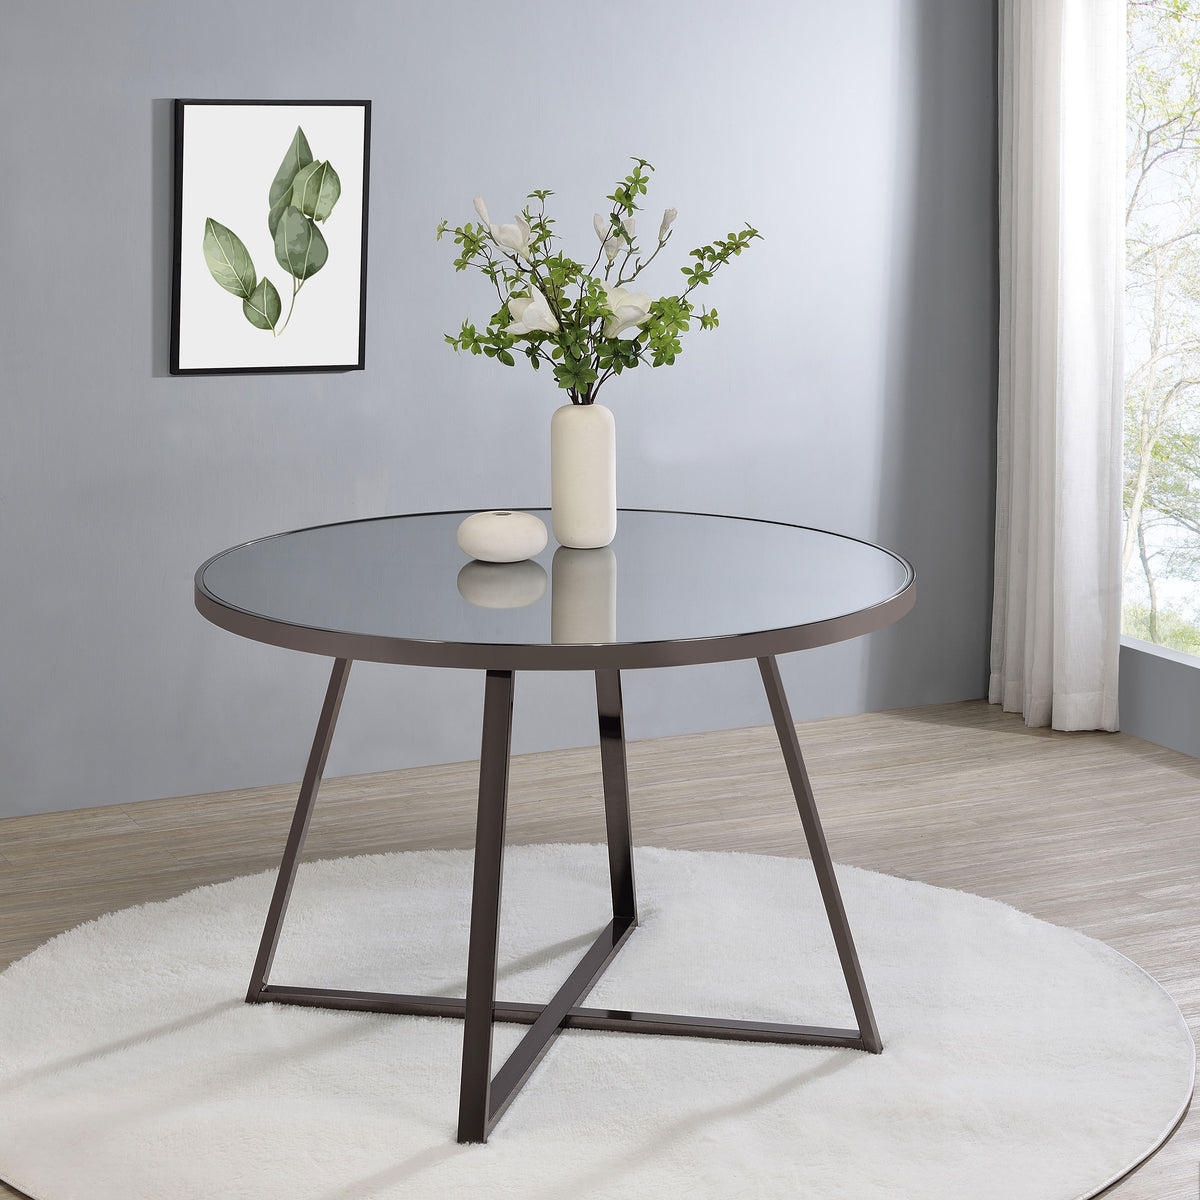 Jillian Round Dining Table with Tempered Mirror Top Black Nickel Jillian Round Dining Table with Tempered Mirror Top Black Nickel Half Price Furniture